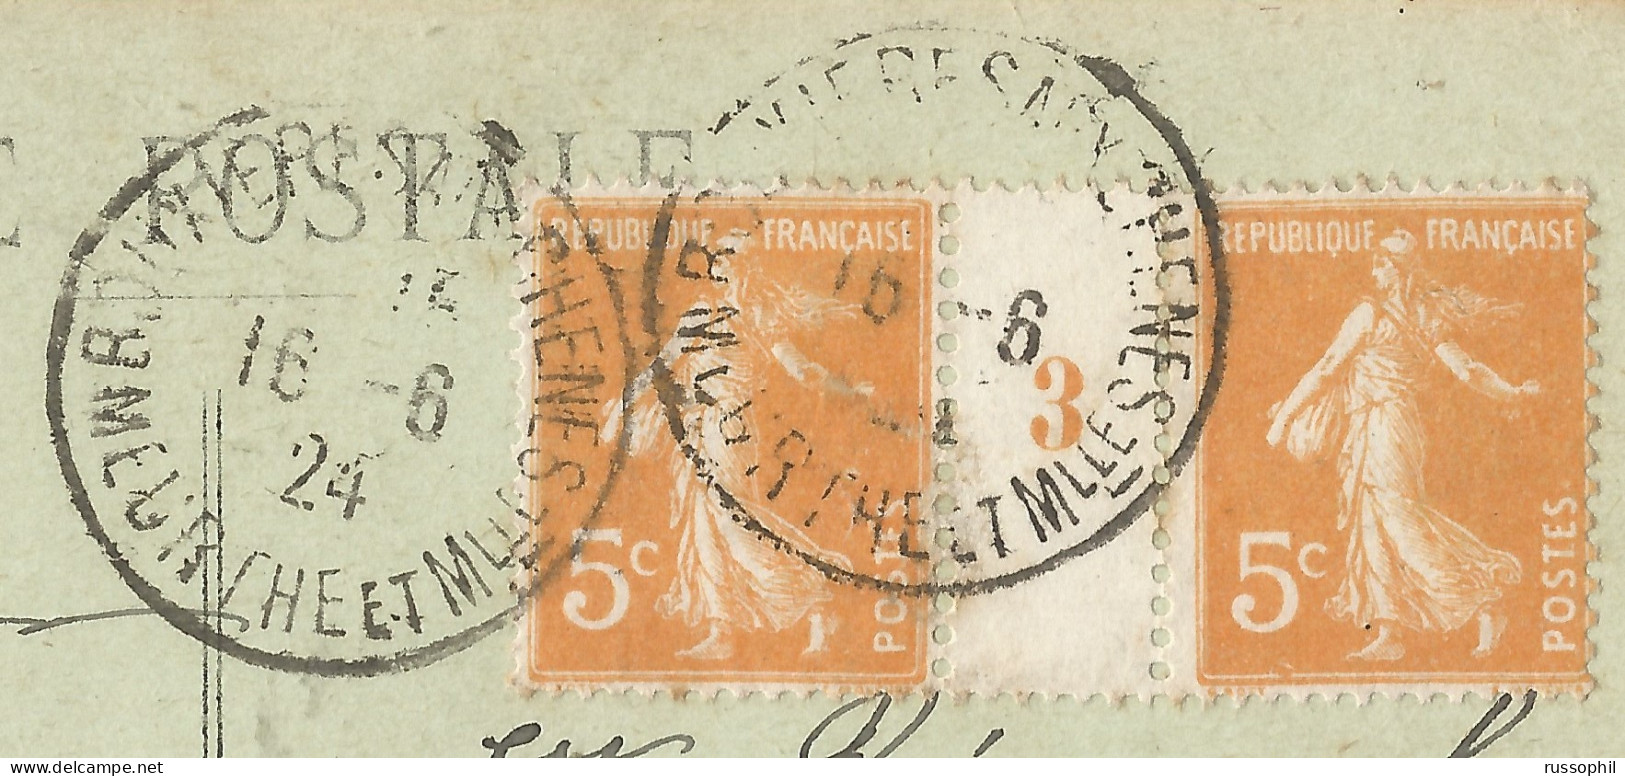 FRANCE -  MILLESIMES - PAIR Yv.  #158 MILLESIME 3 ALONE FRANKING PC FROM BOUXIERES AUX CHENES TO BAGNEUX - 1924 - Millésime